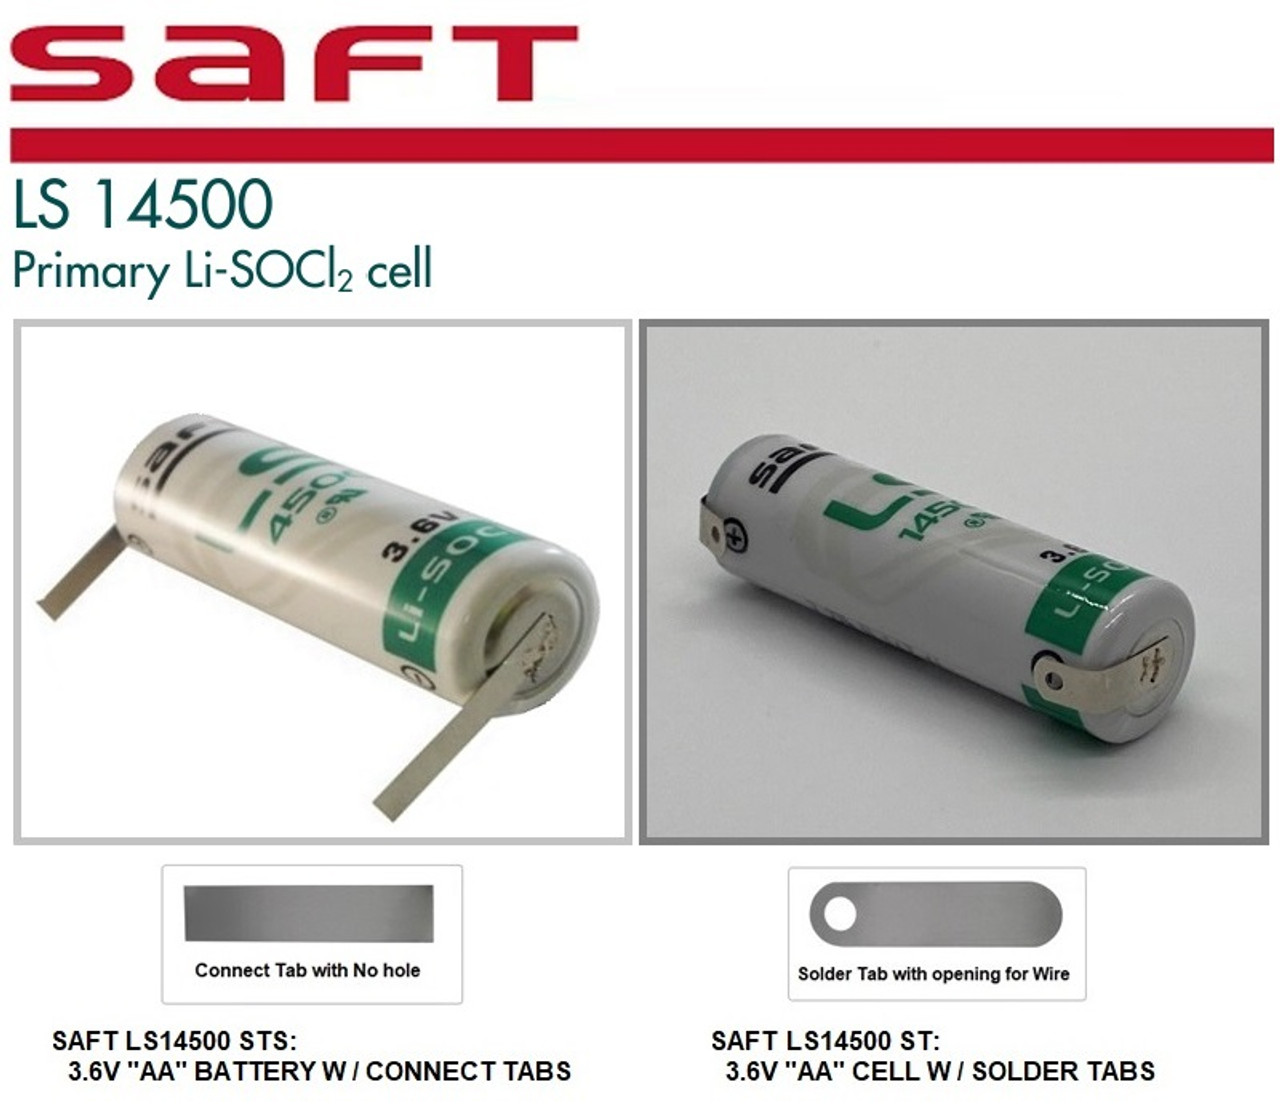 Saft LS14500-AX AA 3.6V Primary Lithium Battery - Clearance Sale